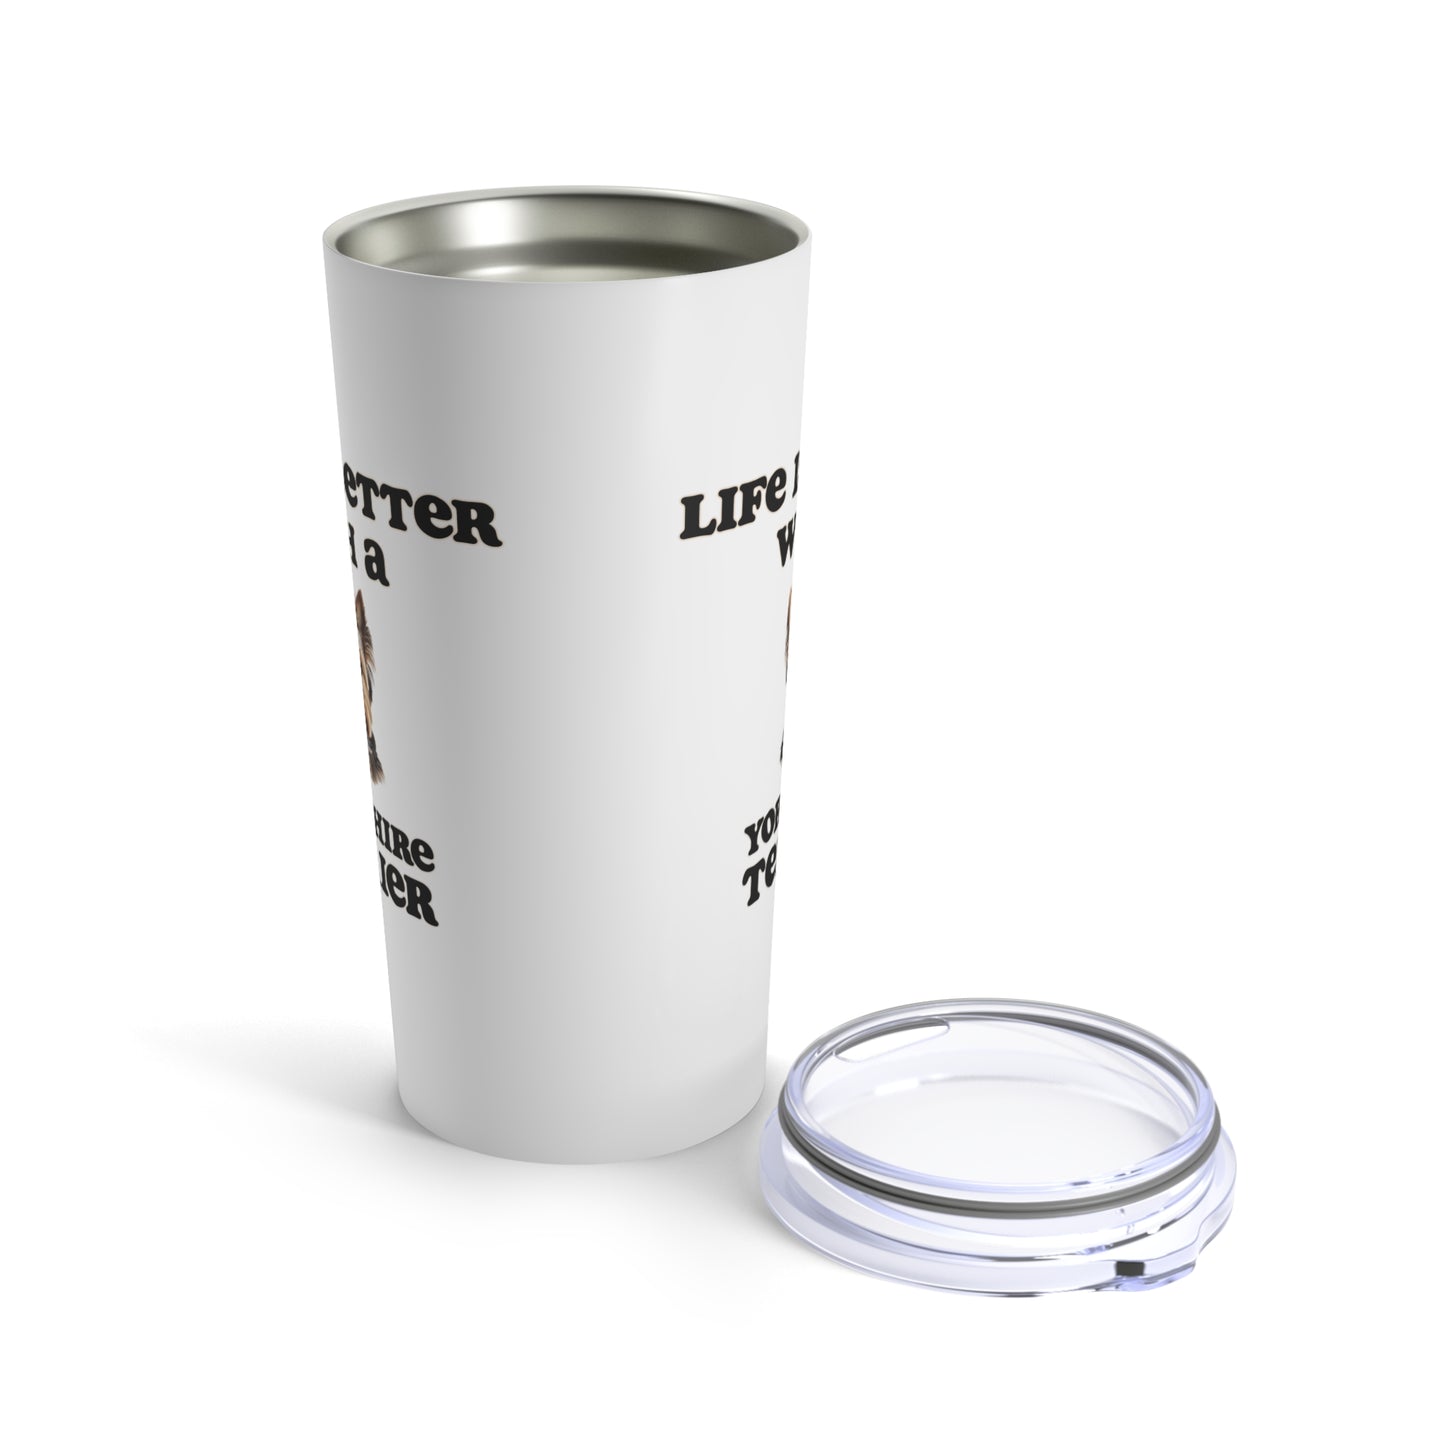 Life is Better with a Yorkshire Terrier Tumbler - 20oz - White - Stainless Steel